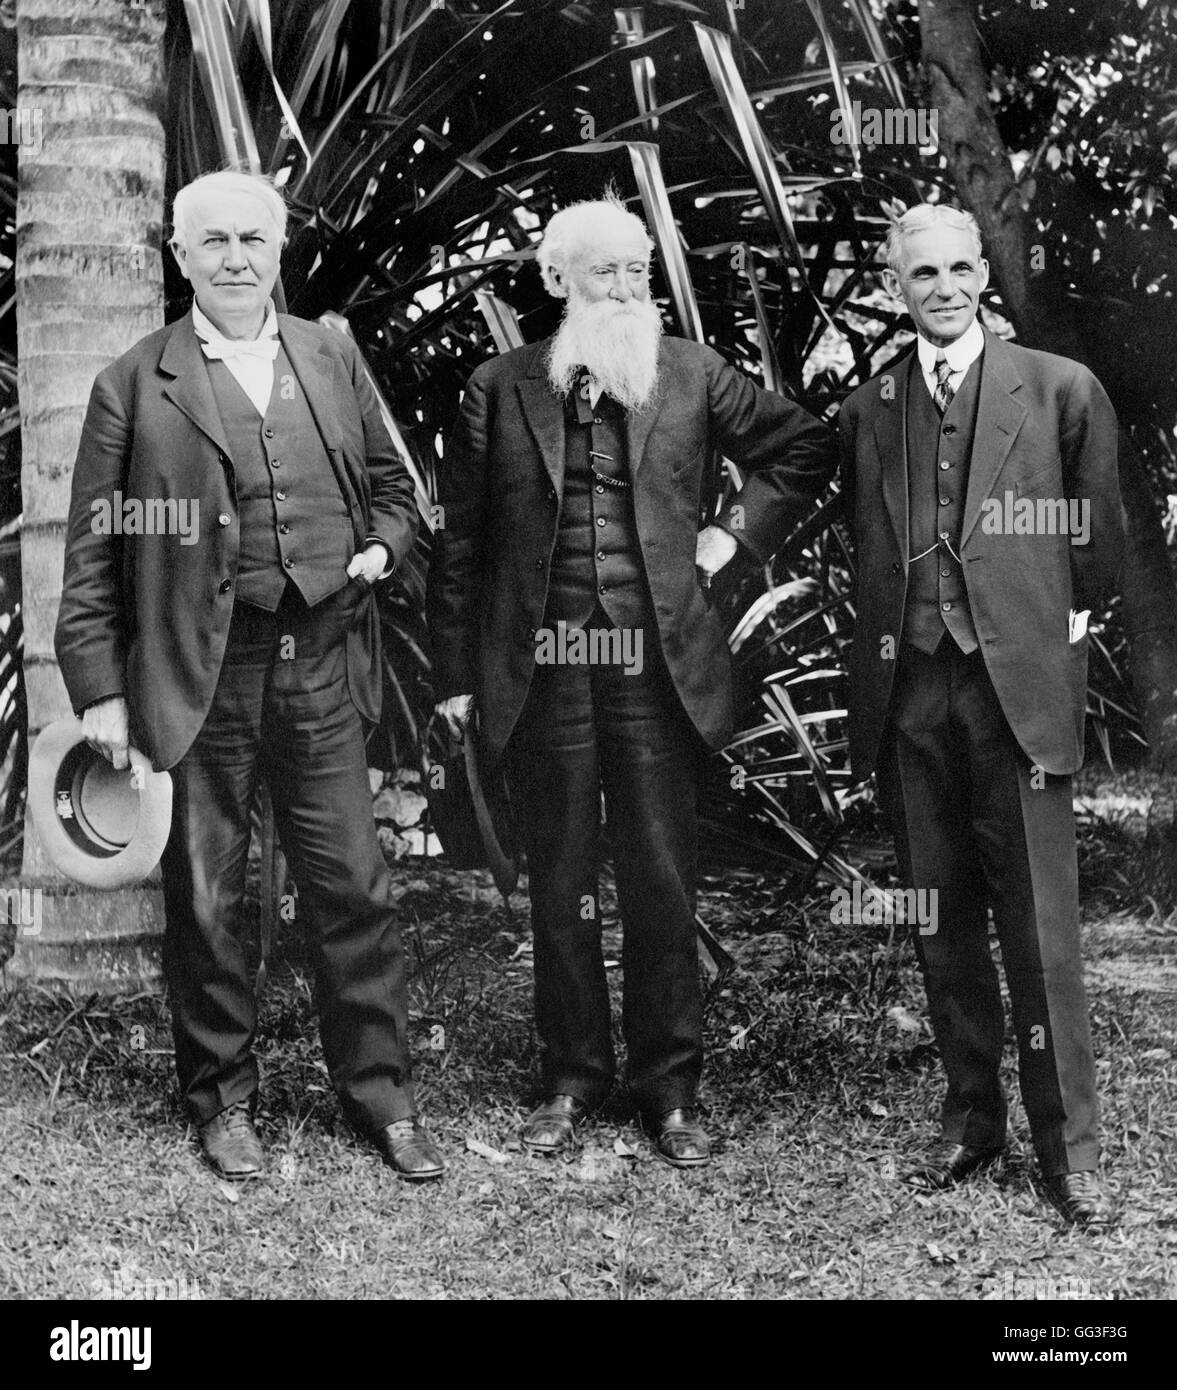 Inventor, Thomas Edison (1847-1831), naturalist, John Burroughs (1837-1921) and automotive pioneer, Henry Ford (1863-1947). Photograph taken c.1914 in Edison's winter home in Fort Myers, Florida. Stock Photo